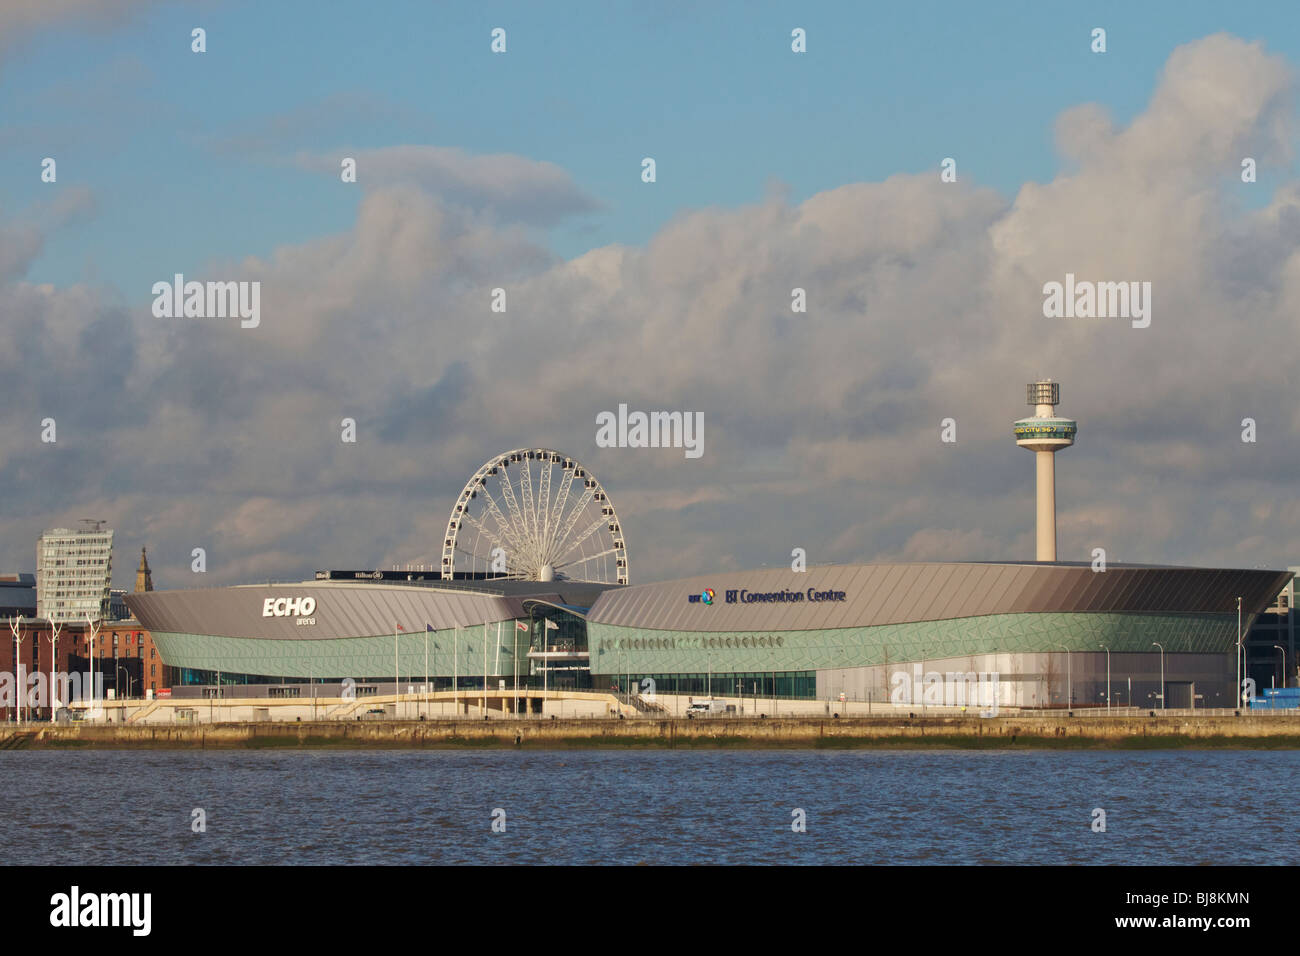 Echo Arena and BT Convention Centre on Liverpool waterfront. Merseyside, Stock Photo